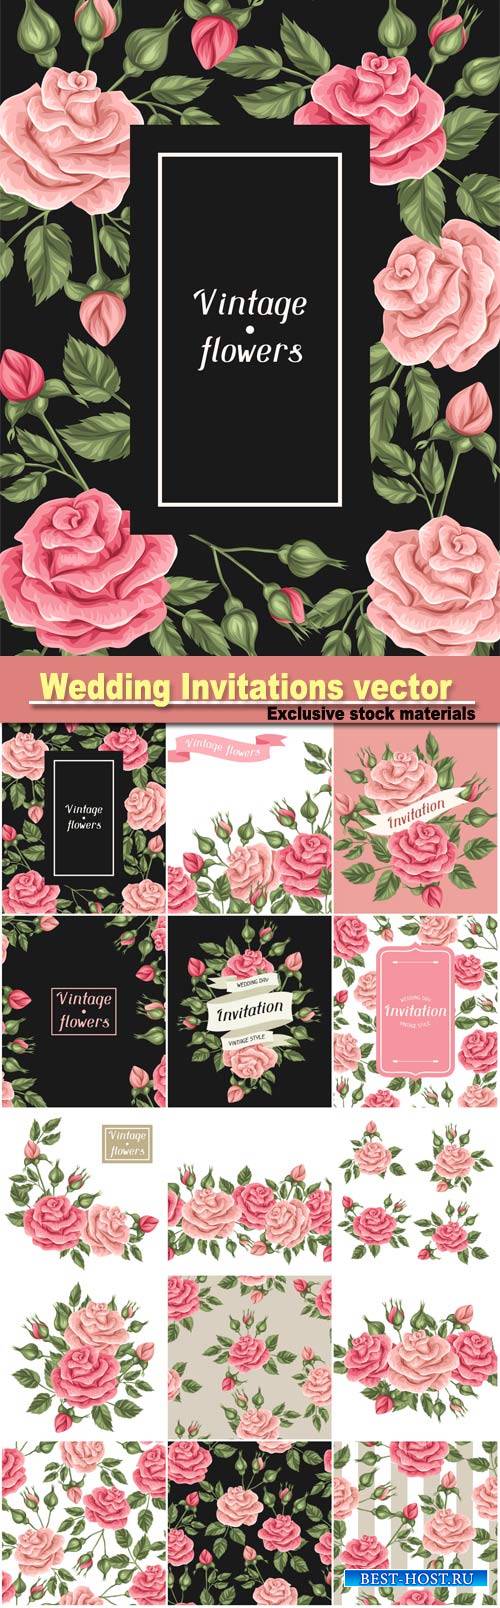 Wedding Invitations, vector background with roses